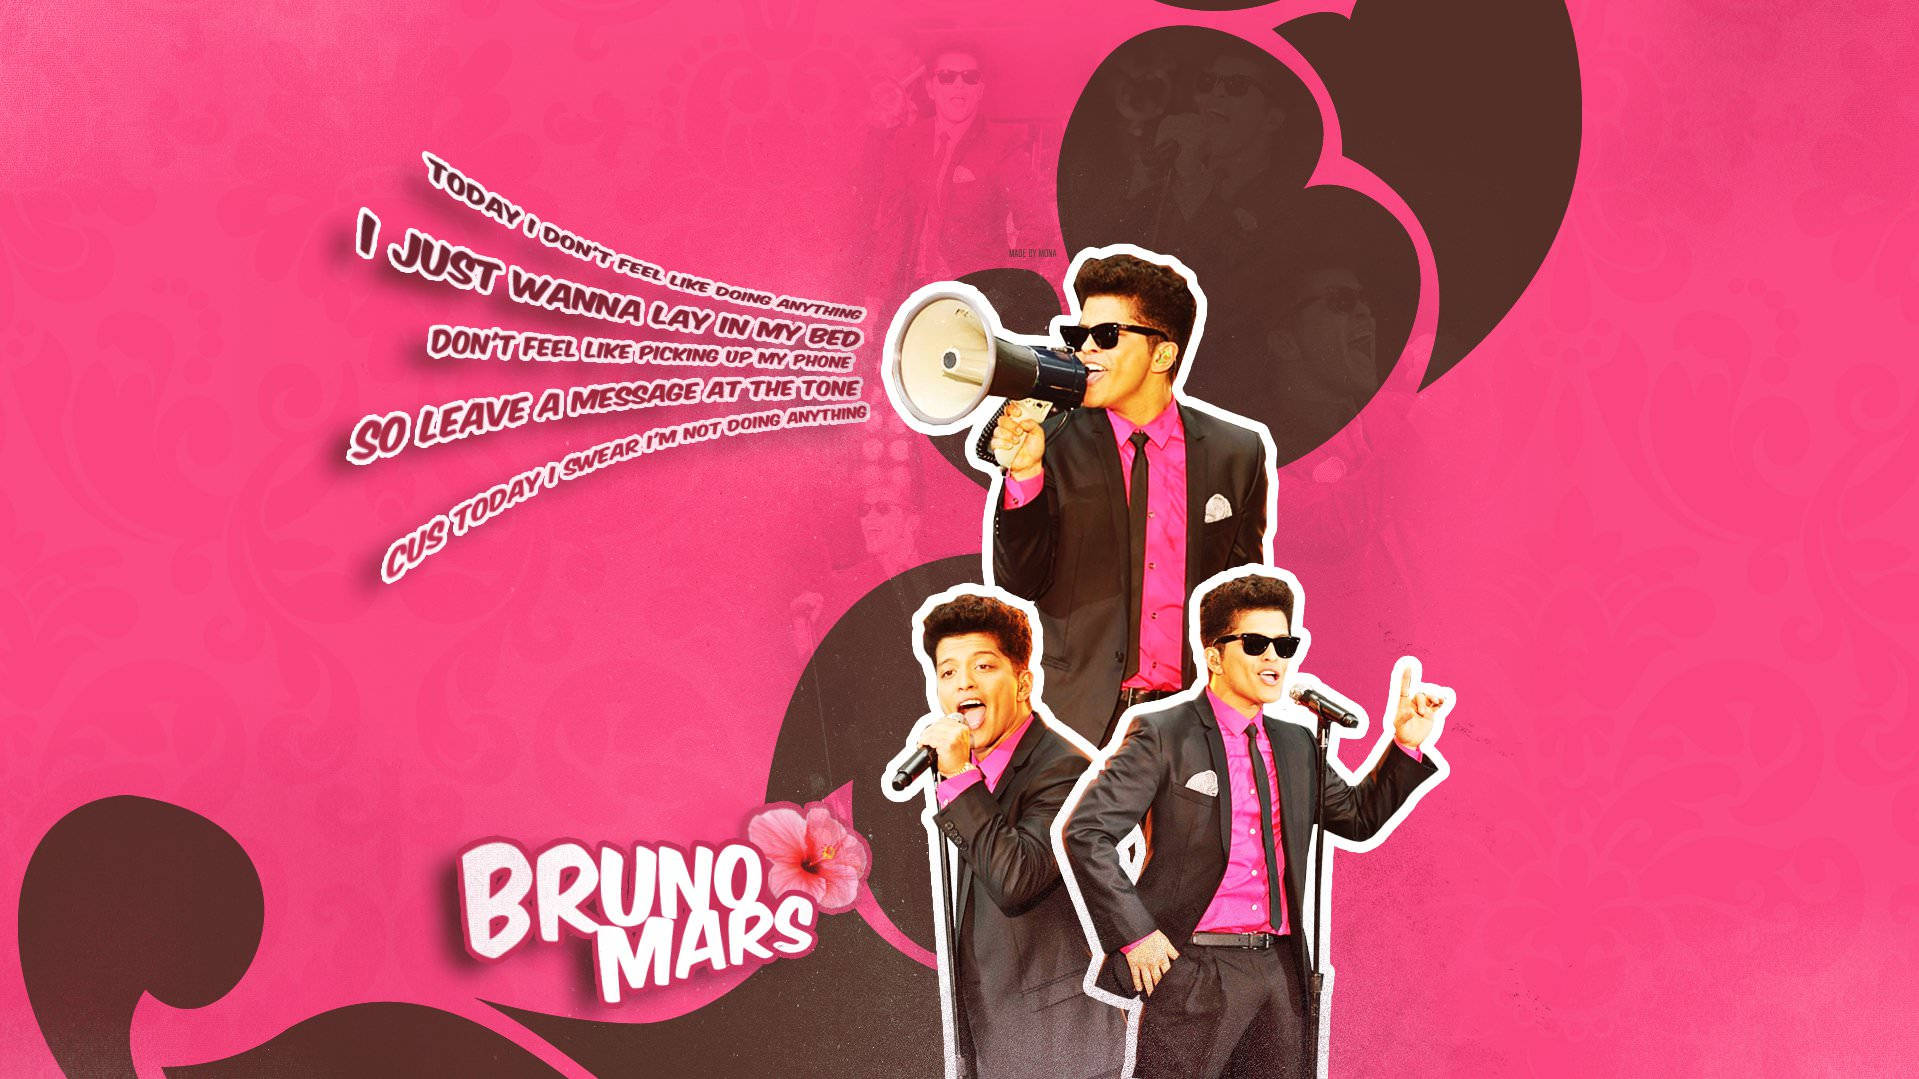 Locked Out Of Heaven - Bruno Mars (Lyrics) | Real-Time YouTube Video View  Count | SocialCounts.org